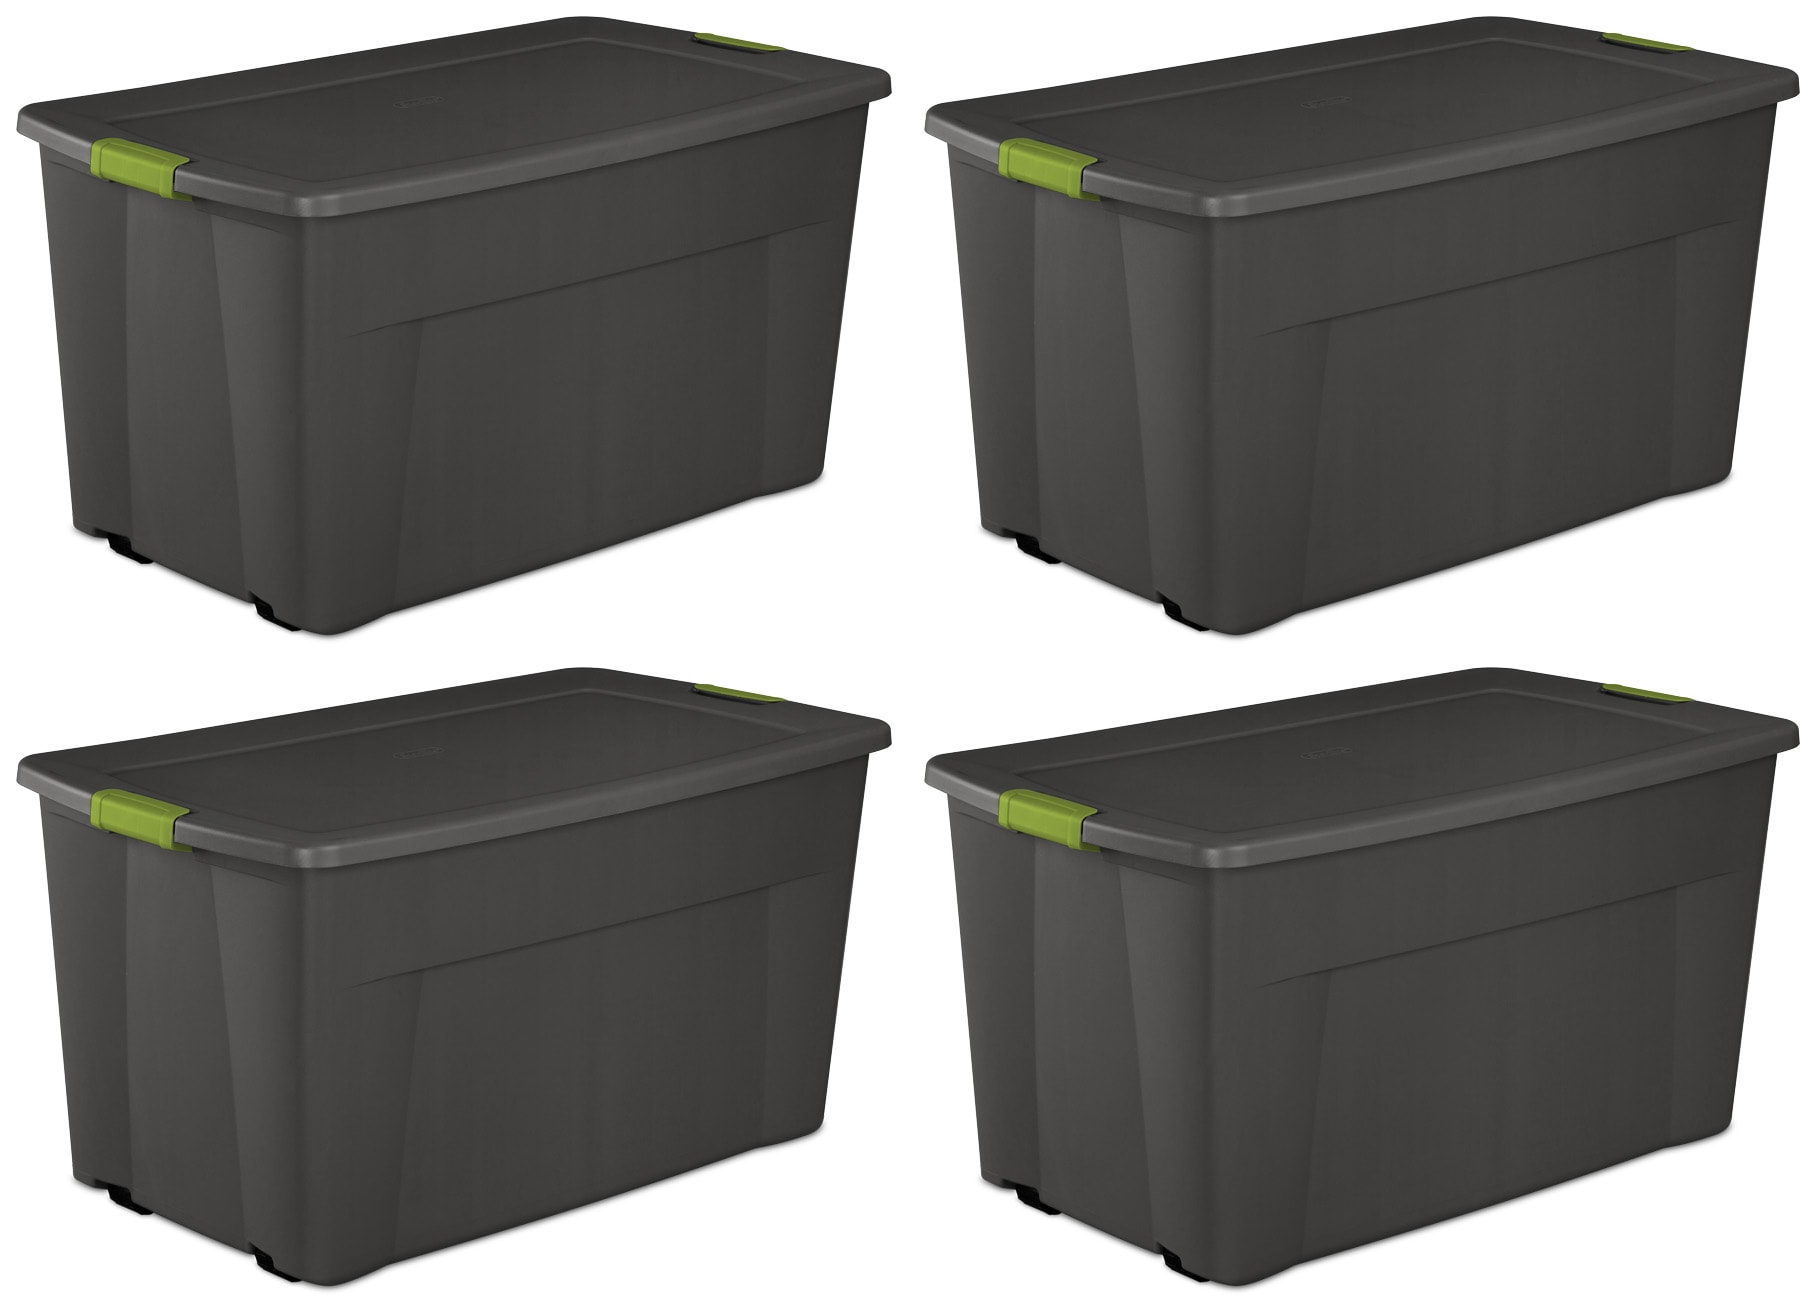 45 gal. Latch and Stack Tote with Wheels in Black with Red Lid Husky #206201 #1005255712